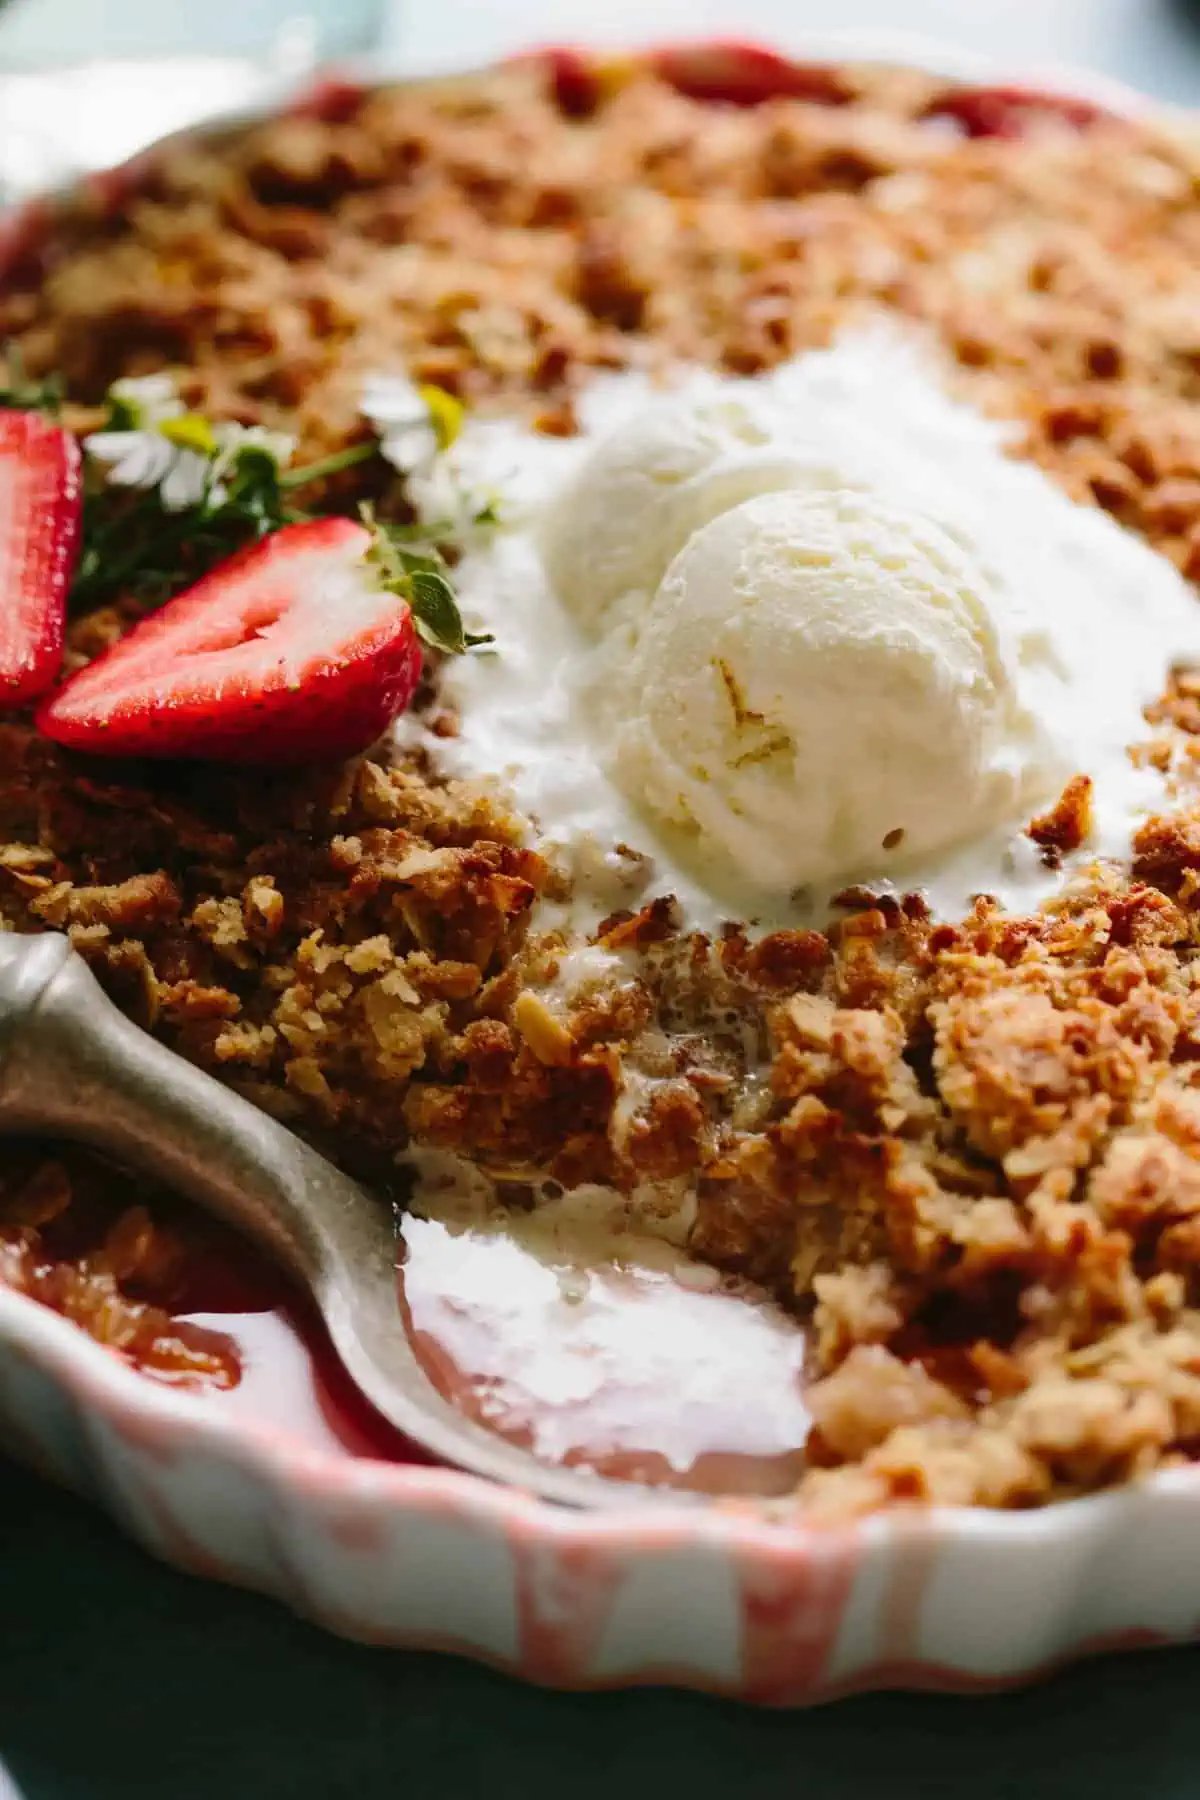 Close up view of a scoop of vanilla ice cream melting over strawberry crisp.